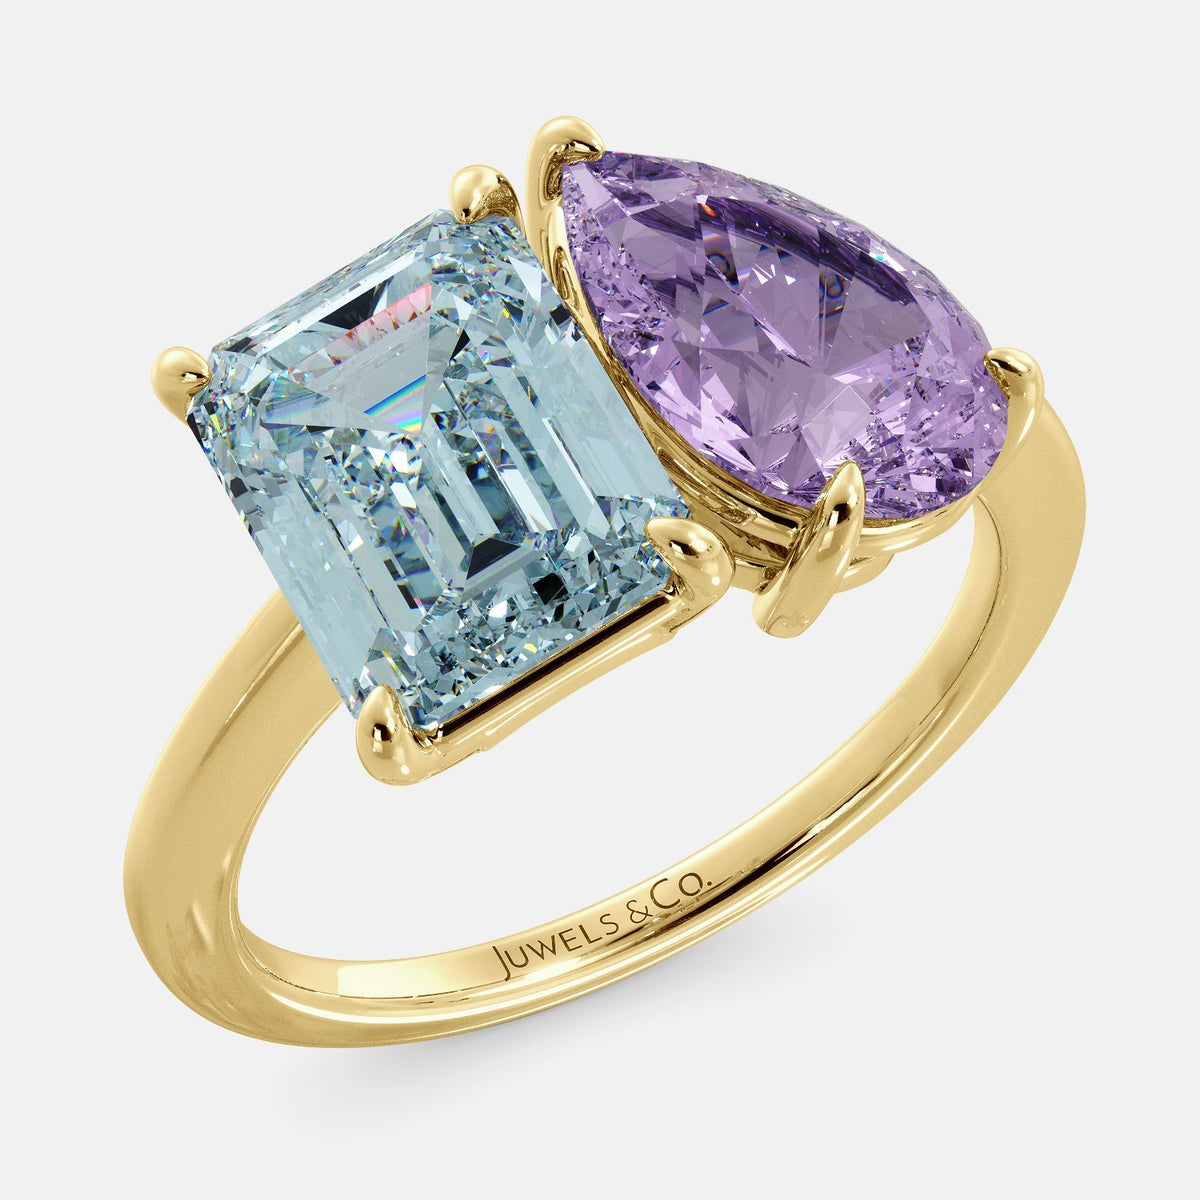 A toi et moi ring with an emerald cut aquamarine and a pear cut amethyst. The ring is set in a 14k yellow gold band and is available in all sizes. Aquamarine is a blue gemstone that is said to promote spiritual growth and strengthen self-confidence. Amethyst is a purple gemstone that is said to promote peace, love, and harmony. The toi et moi ring is a beautiful and unique way to show your love and commitment to someone special.